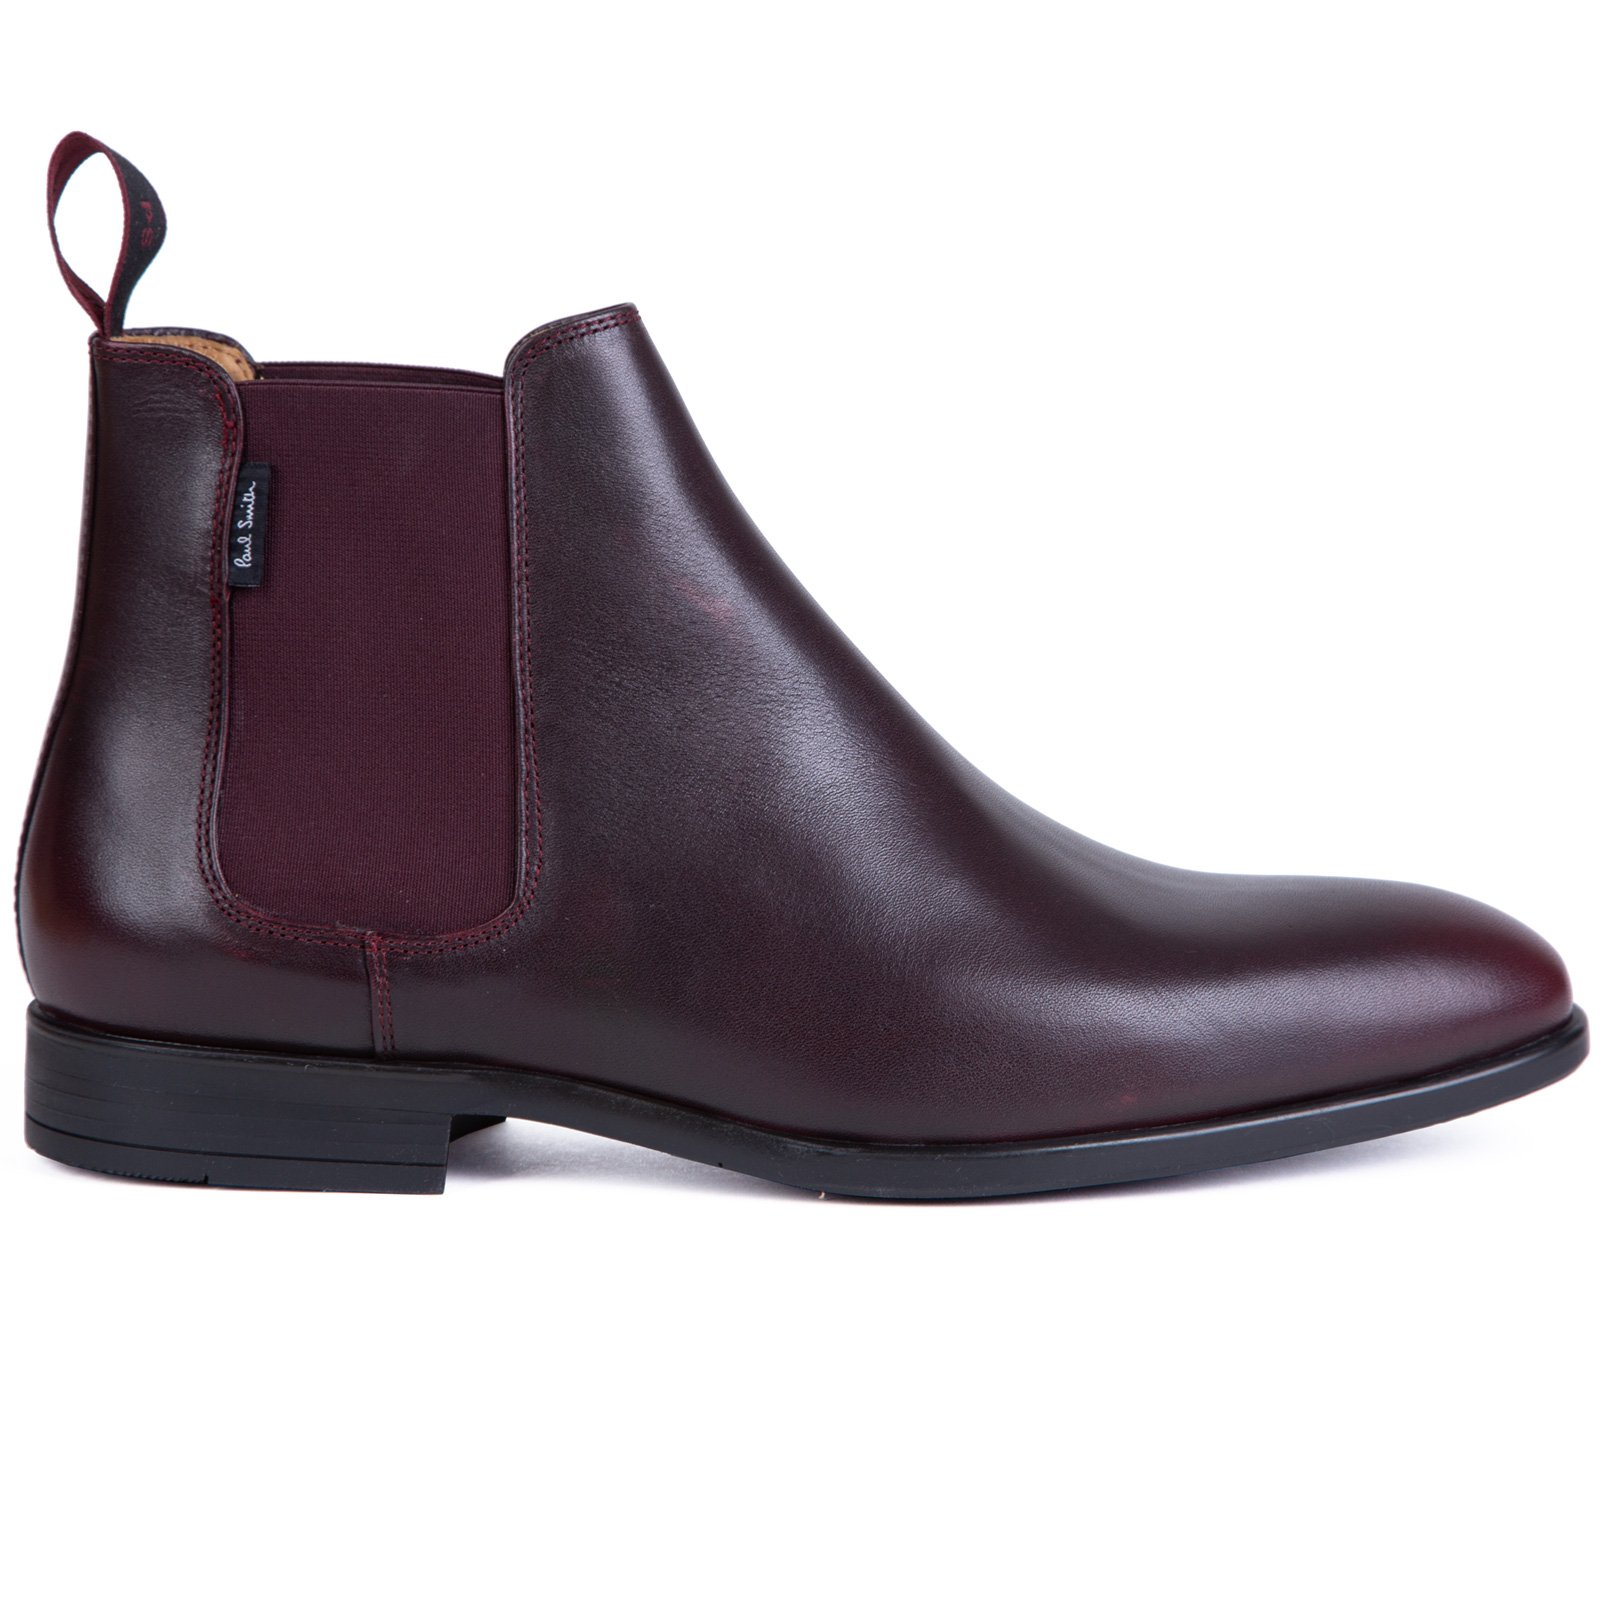 Gerald Burgundy Leather Chelsea Boot - Shoes & Boots-Dress Shoes ...